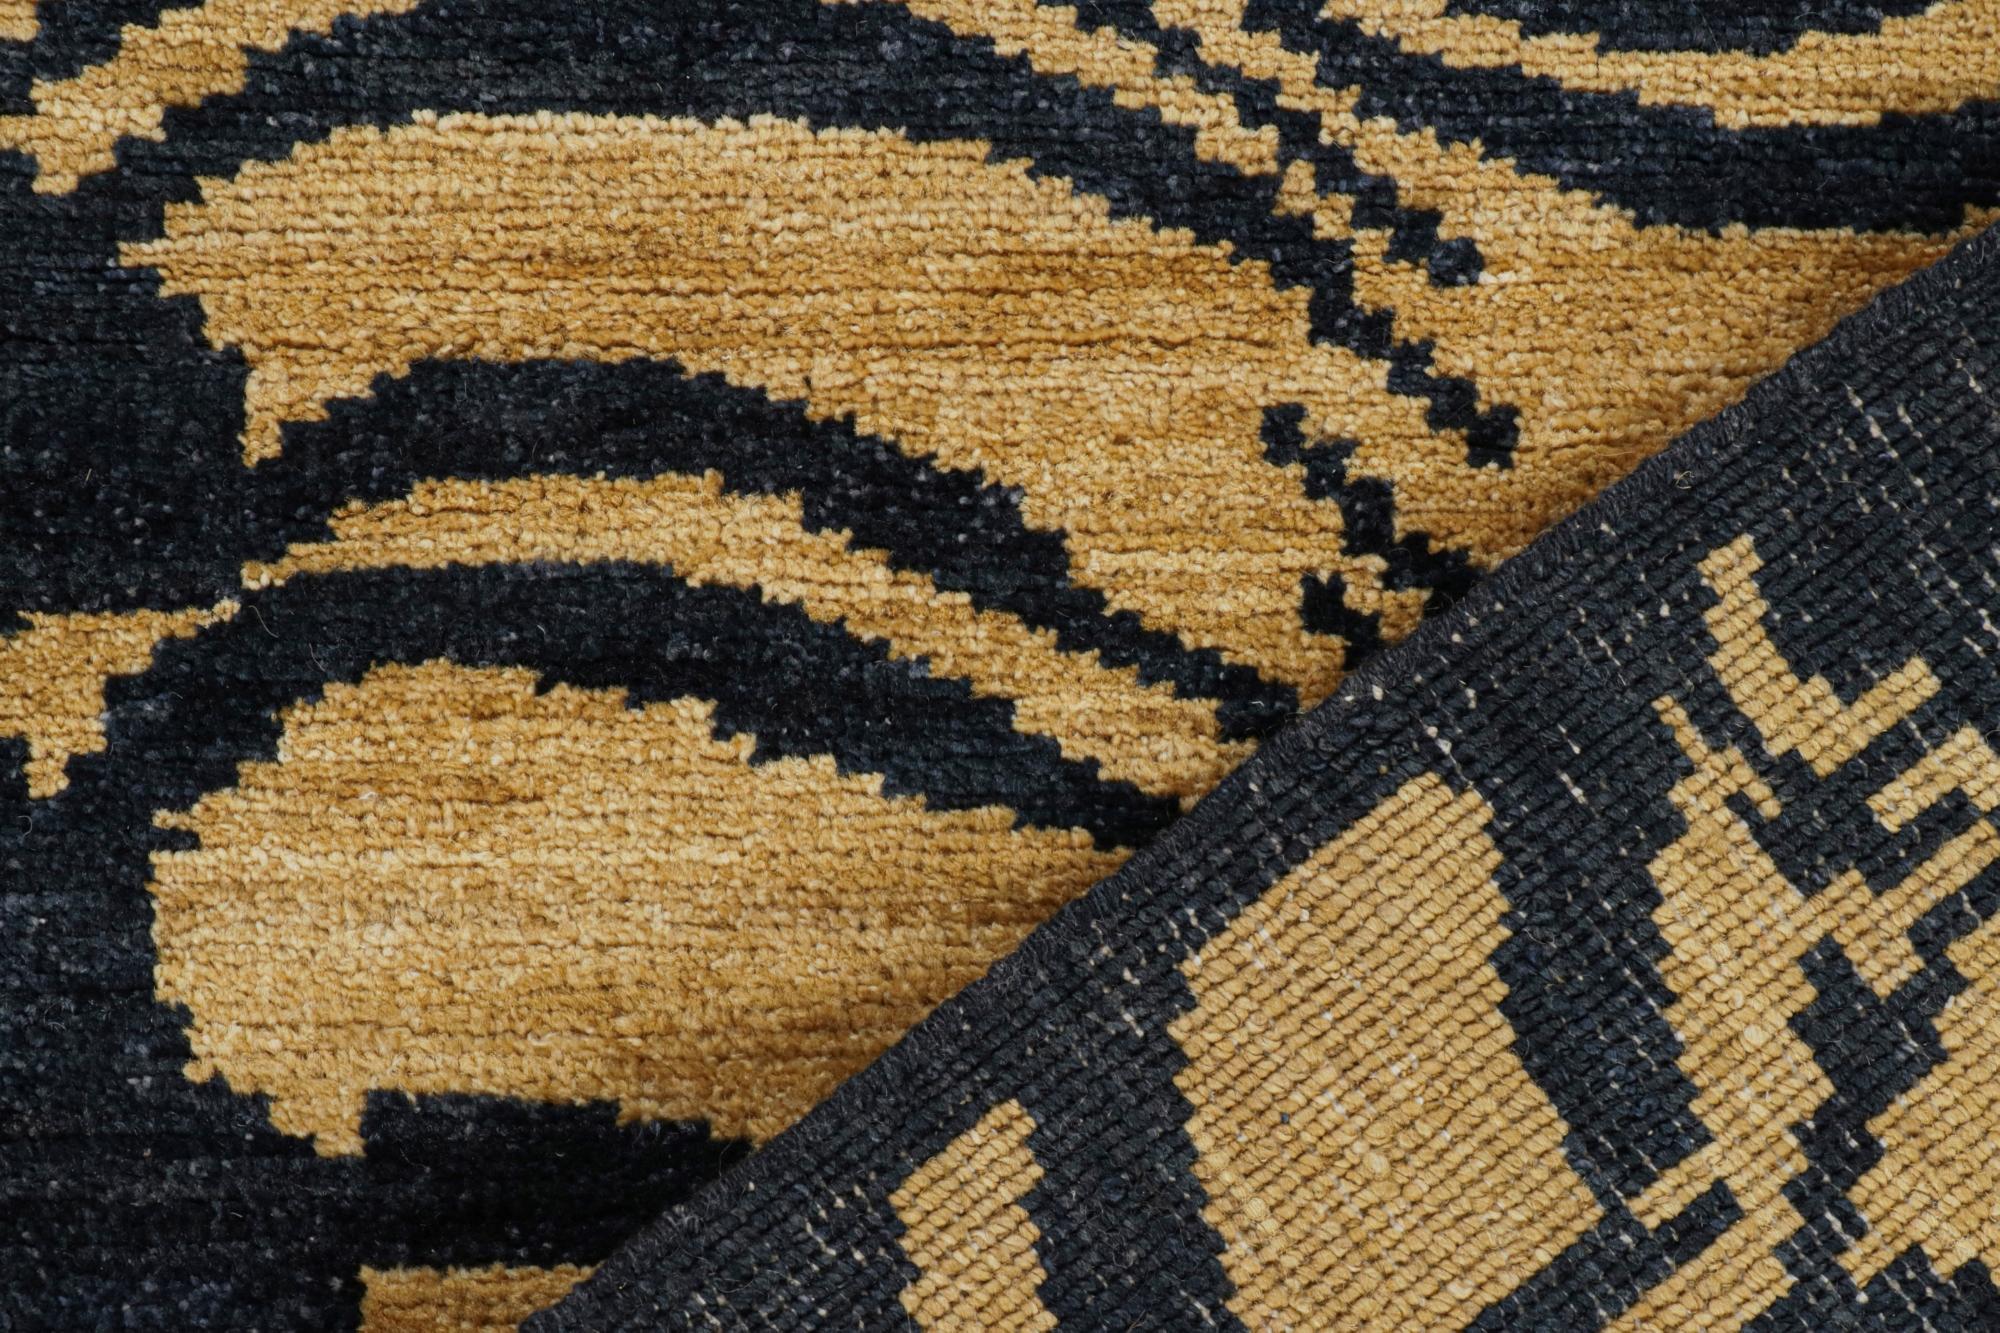 Laine Tapis & Kilim's Classic Style Tiger Runner in Navy Blue and Gold Pictorial (en anglais) en vente